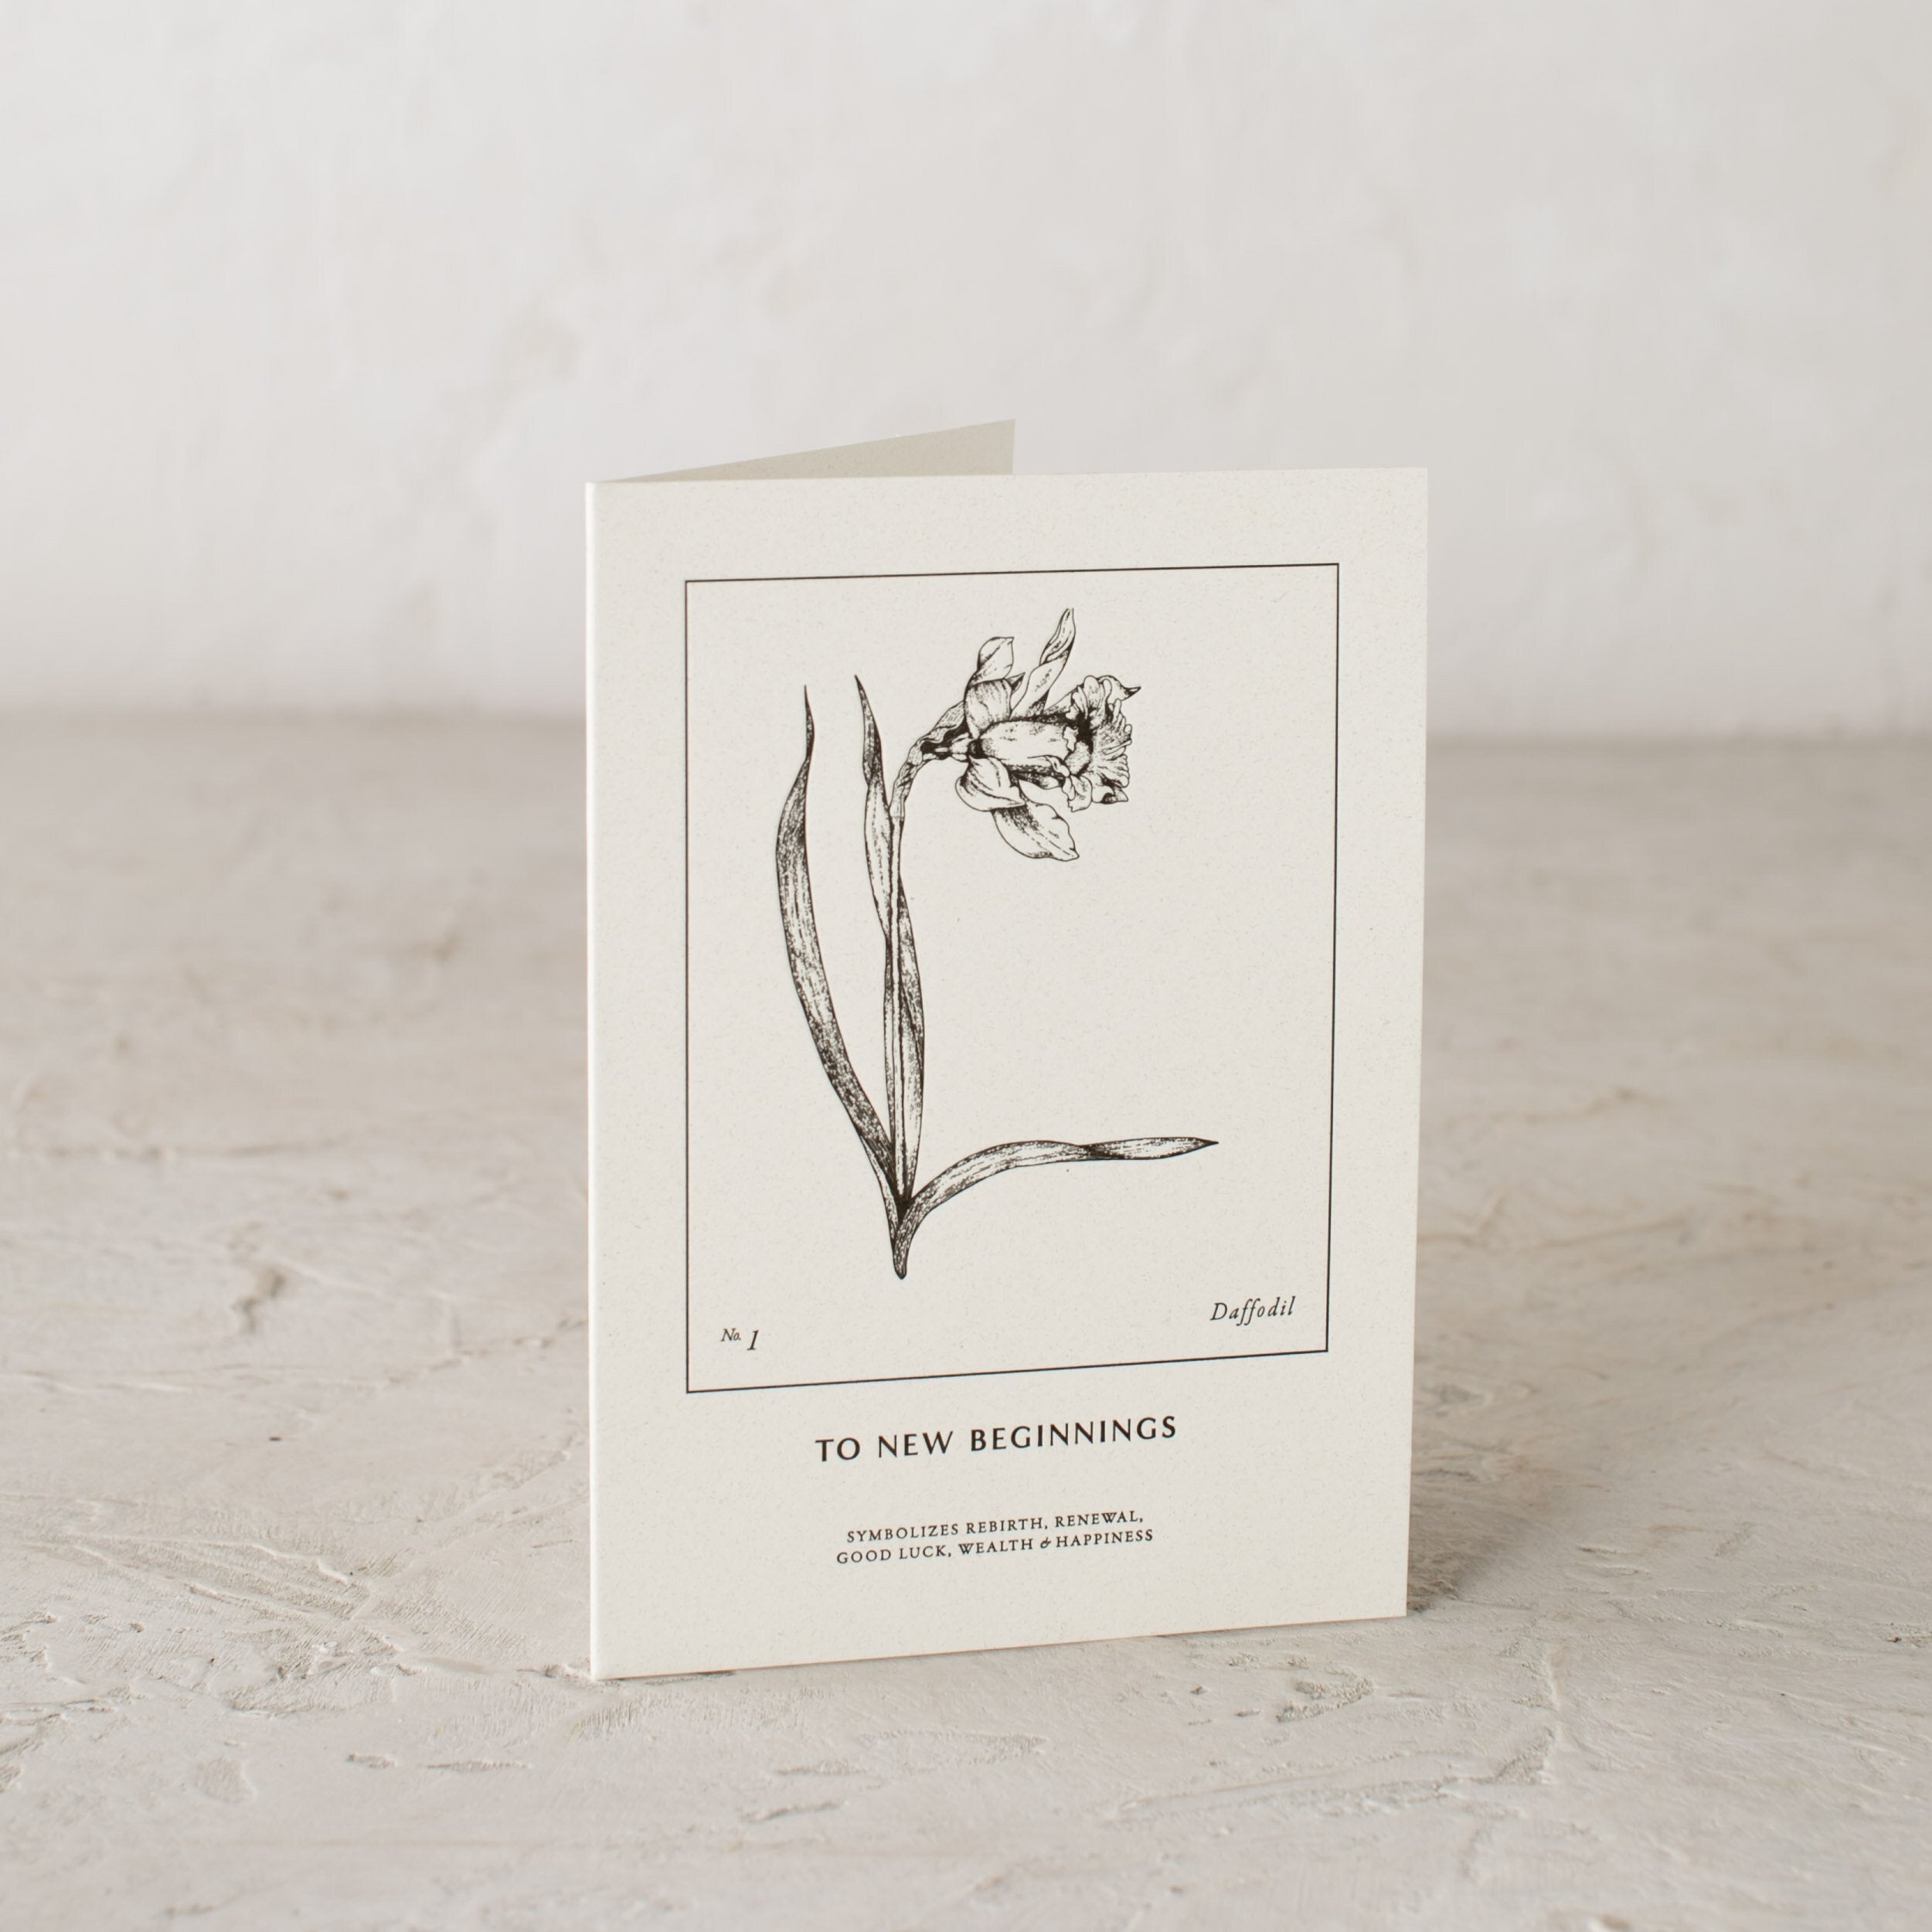 Botanical letter pressed illustration of a Daffodils - To New Beginnings - Symbolizes Rebirth, Renewal, Good Luck, Wealth and Happiness. Designed and sold by Shop Verdant Kansas City Gift Store.